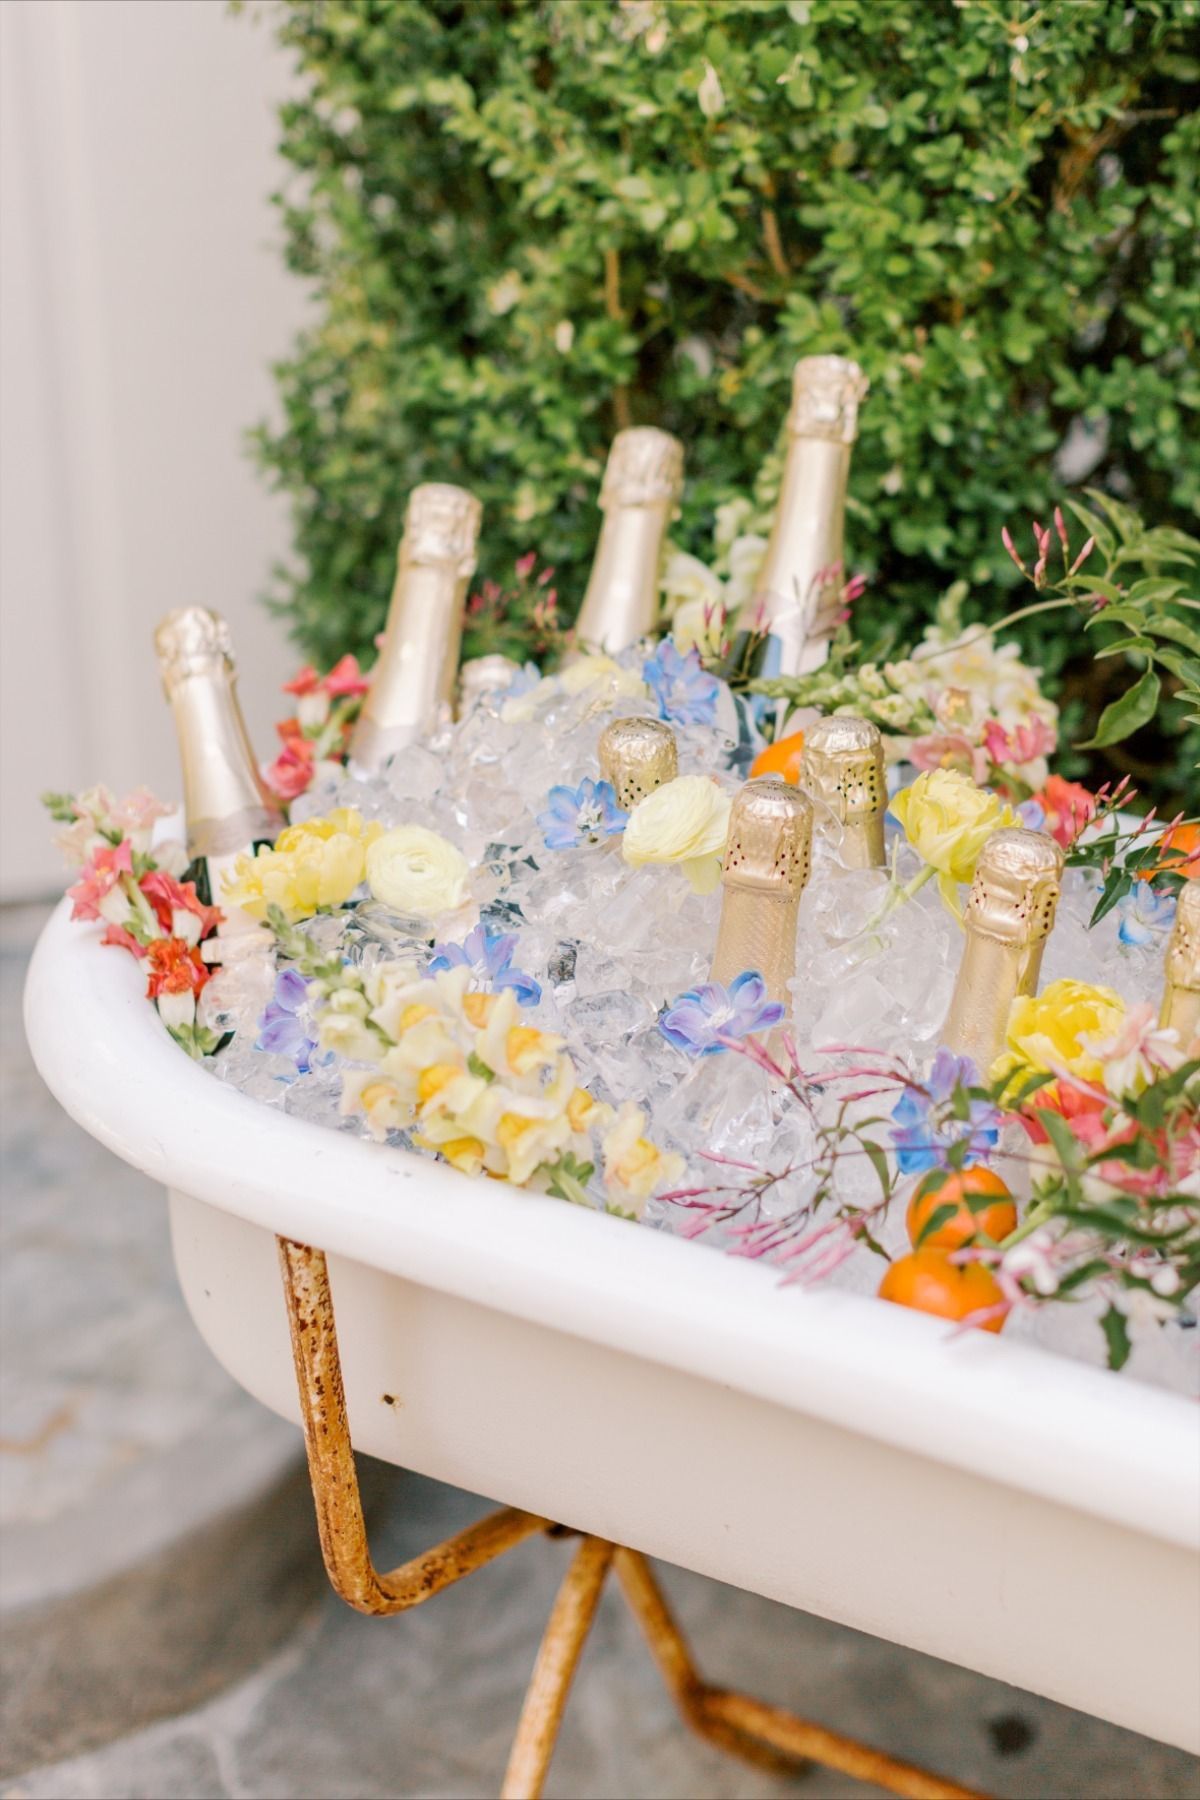 Mother\u2019s Day at The Flower Market with Mimosas and Pastries 